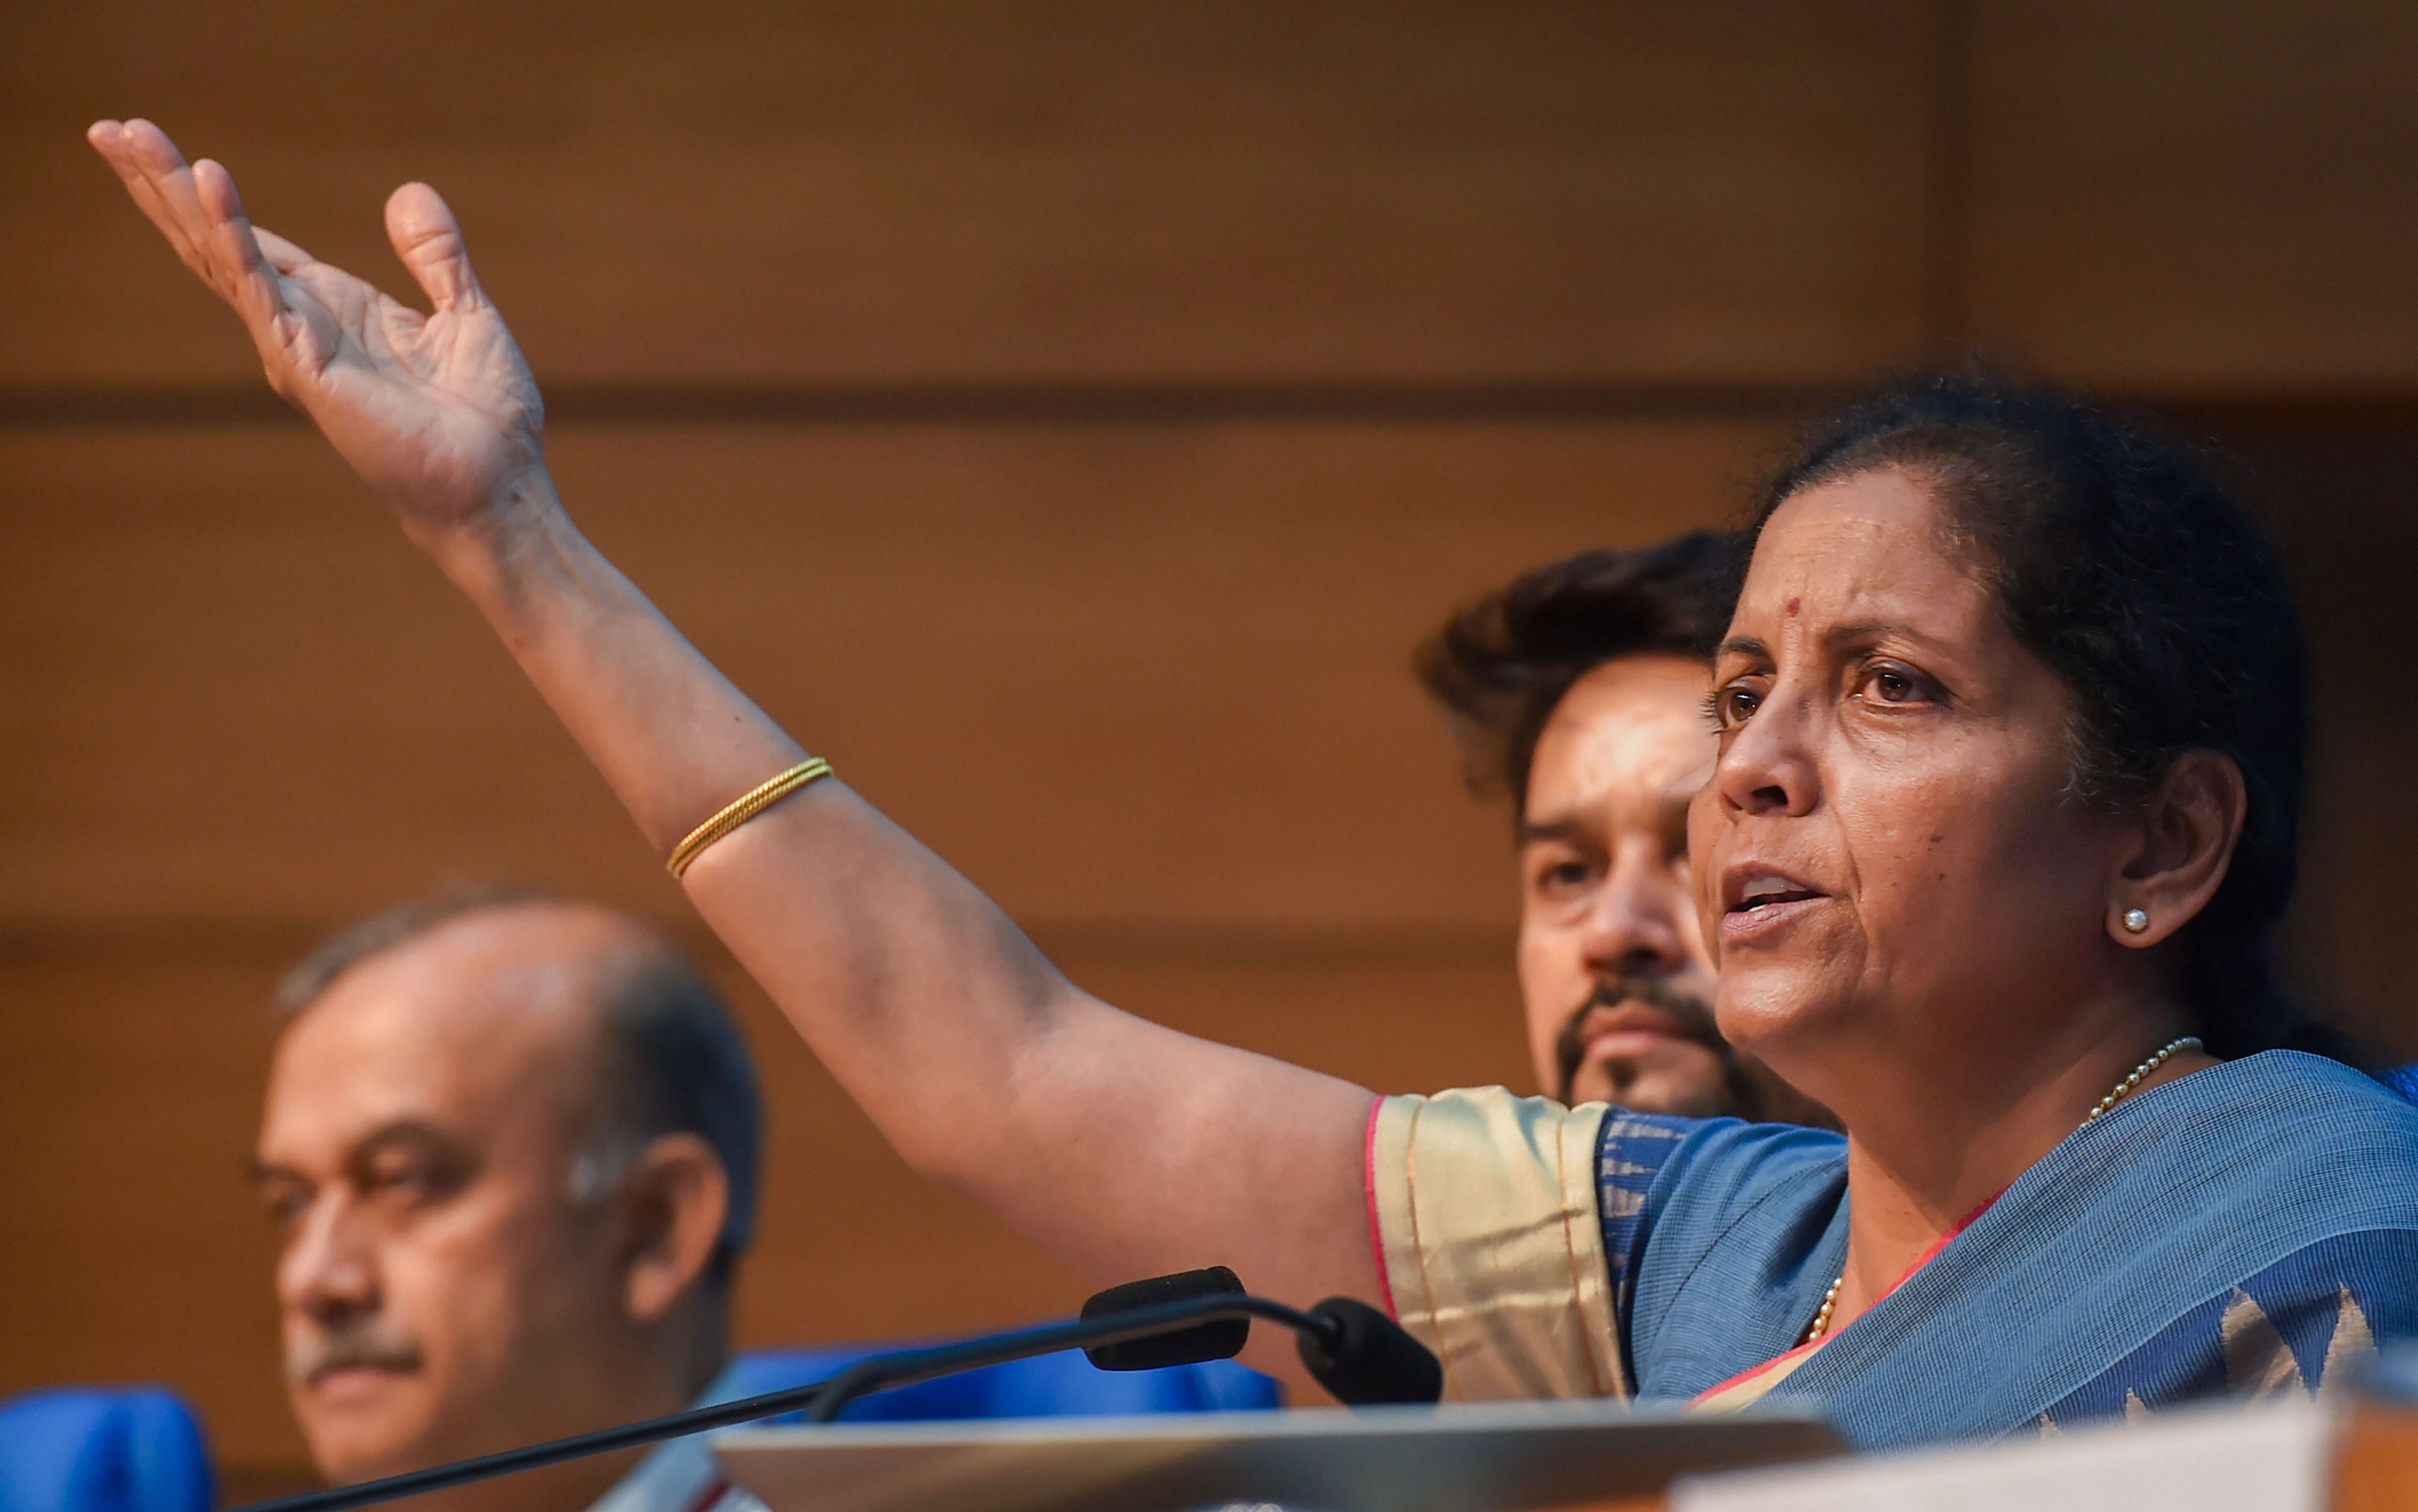 Finance minister Nirmala Sitharaman during the press conference in New Delhi on August 23.